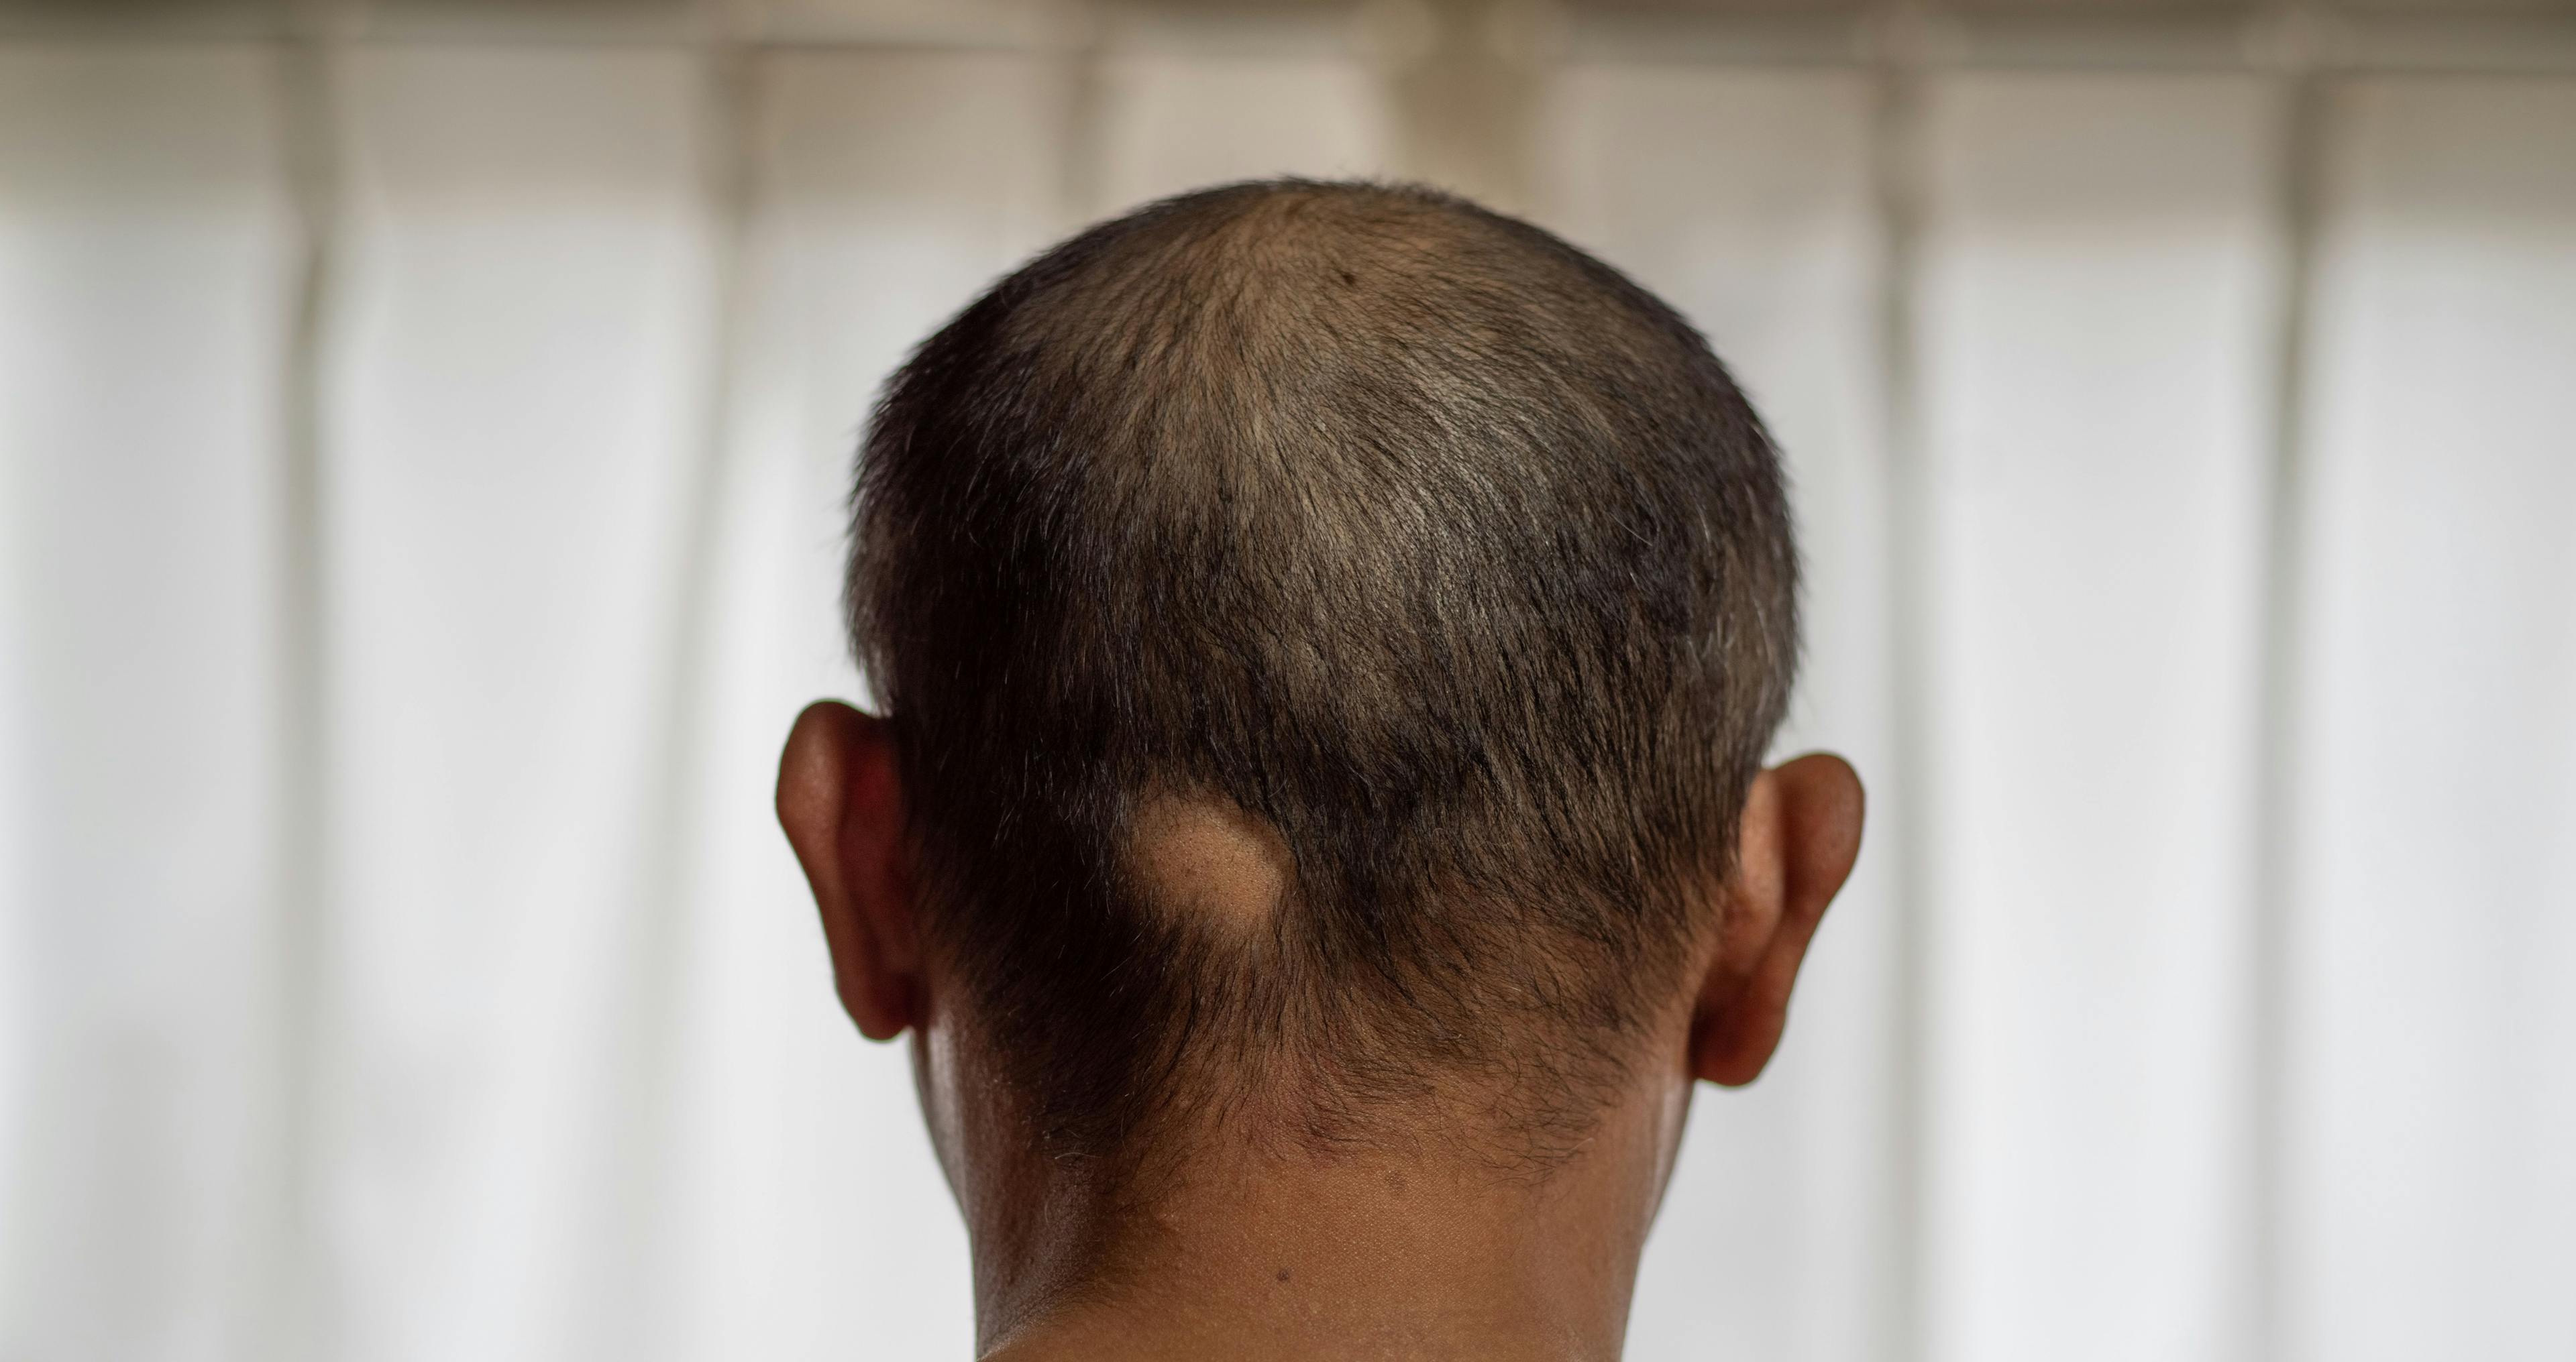 Several Barriers Linked to Hindered Access of JAKi Therapy in Patients, Particularly Non-White, With Alopecia Areata